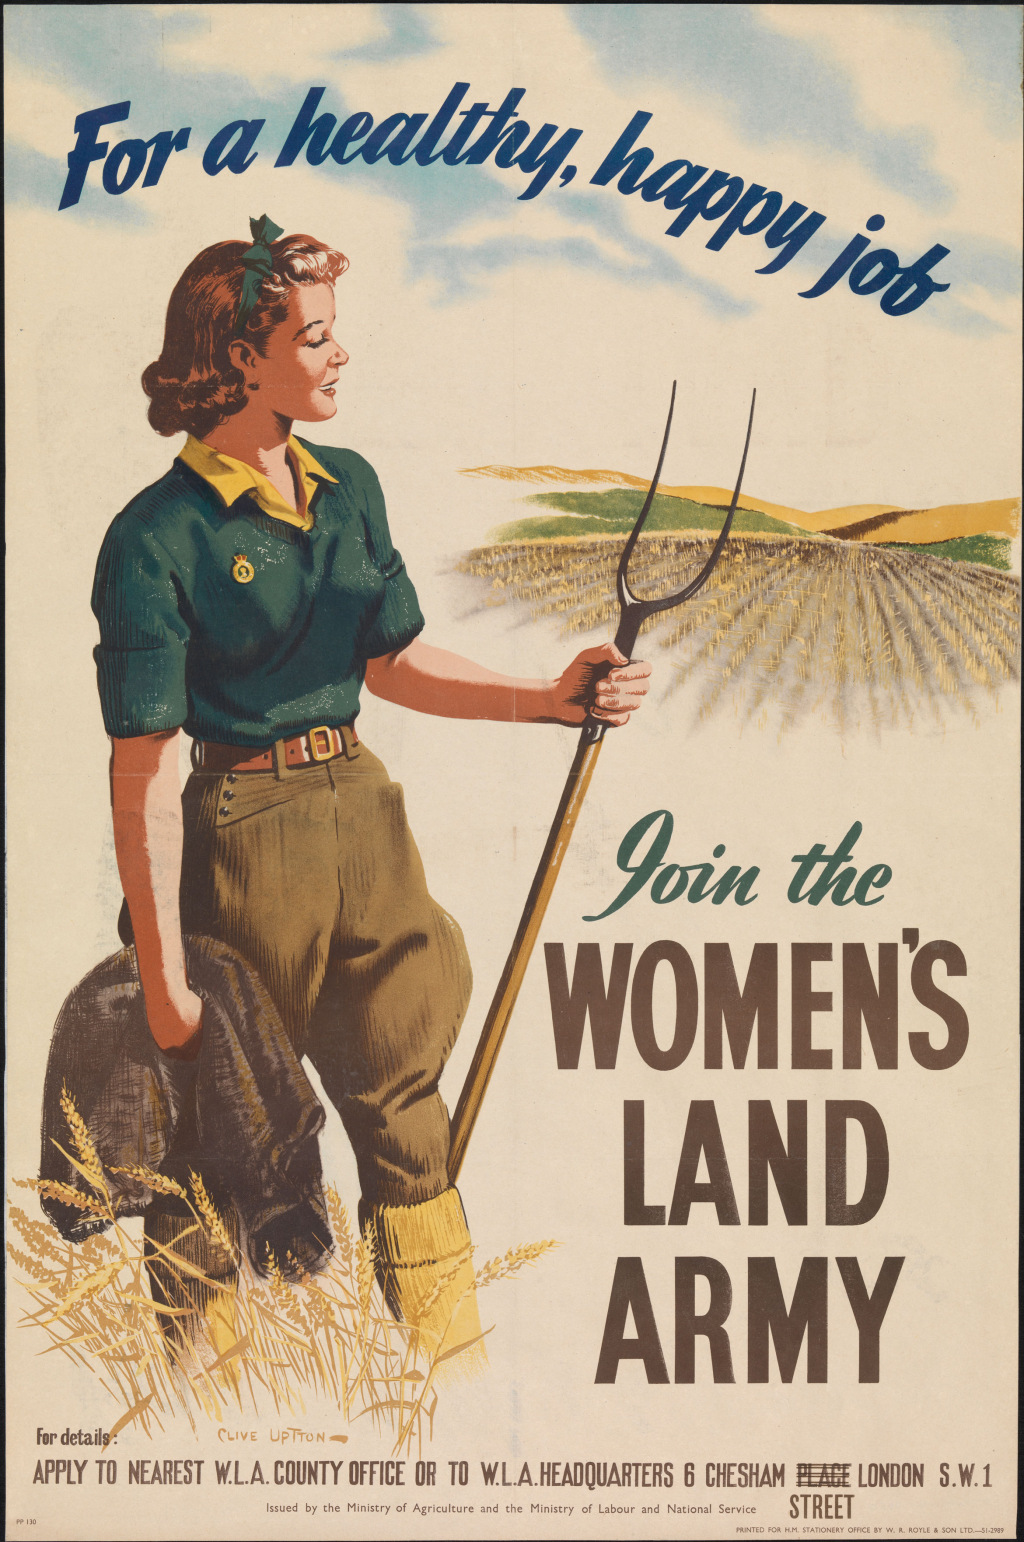 A poster inviting women to join the Women's Land Army